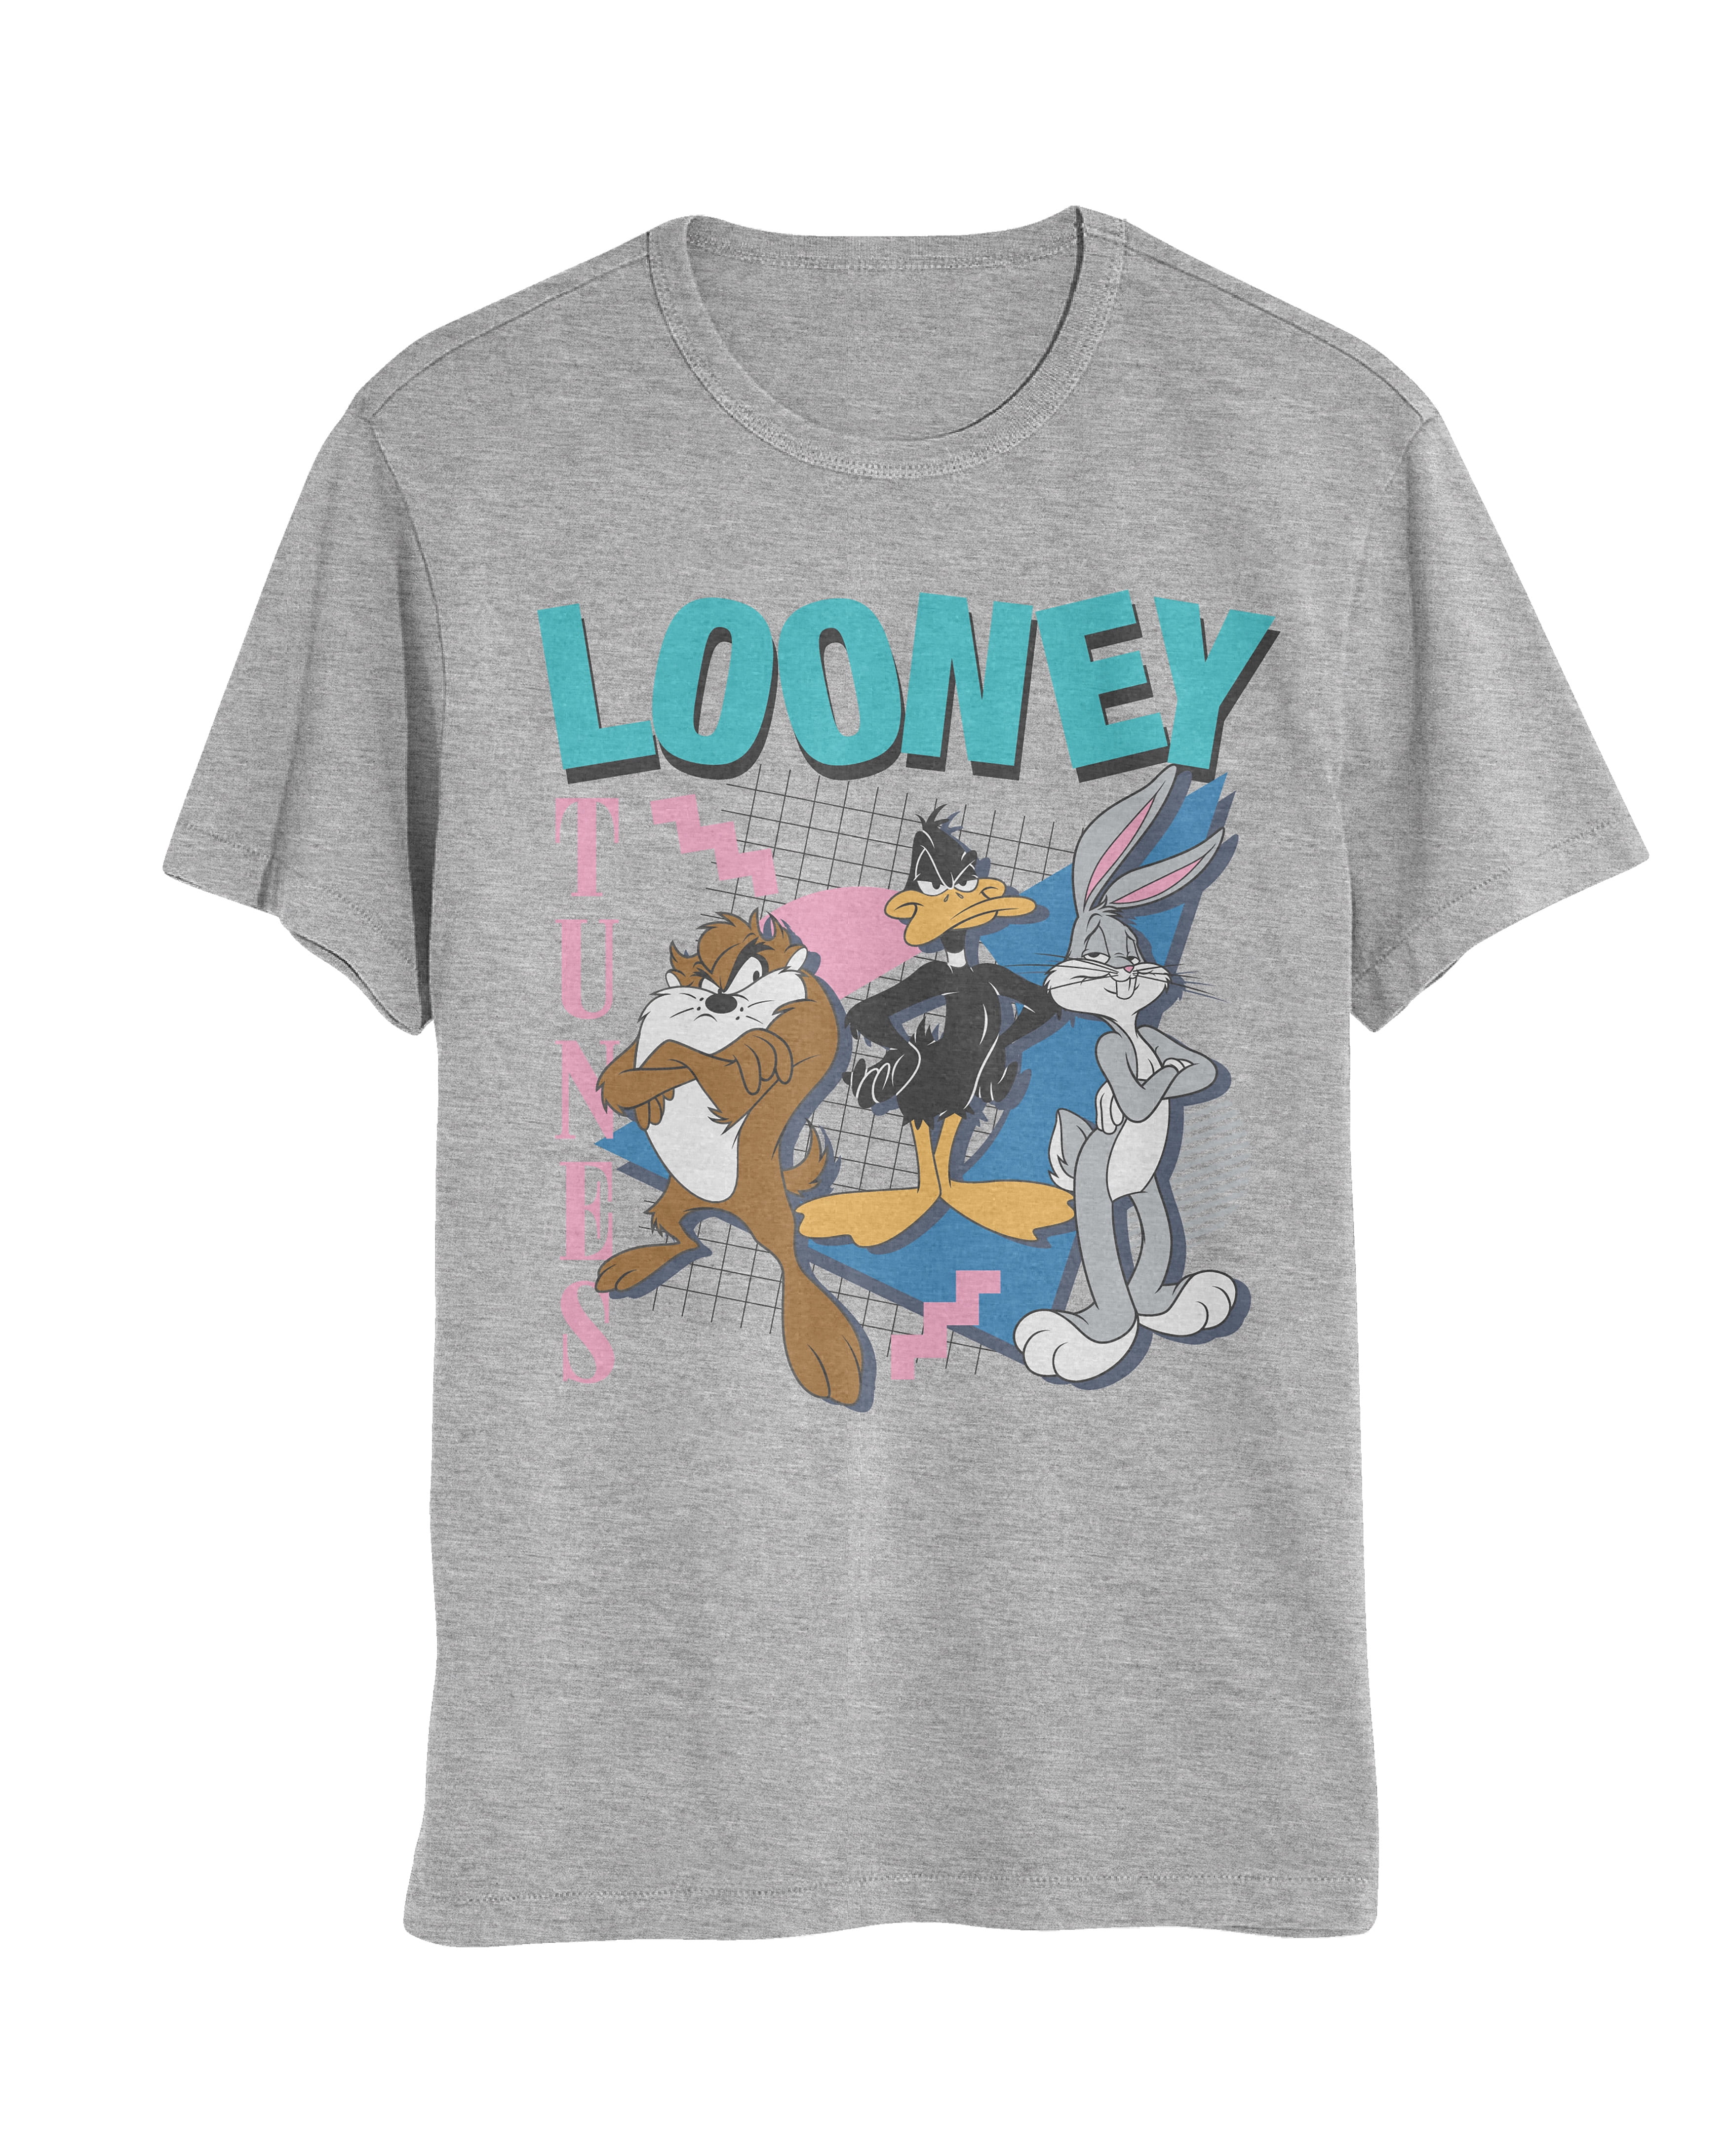 Looney Tunes Taz, Daffy and Bugs Bunny Mens and Womens Short Sleeve T-Shirt  (White, S-XXL)